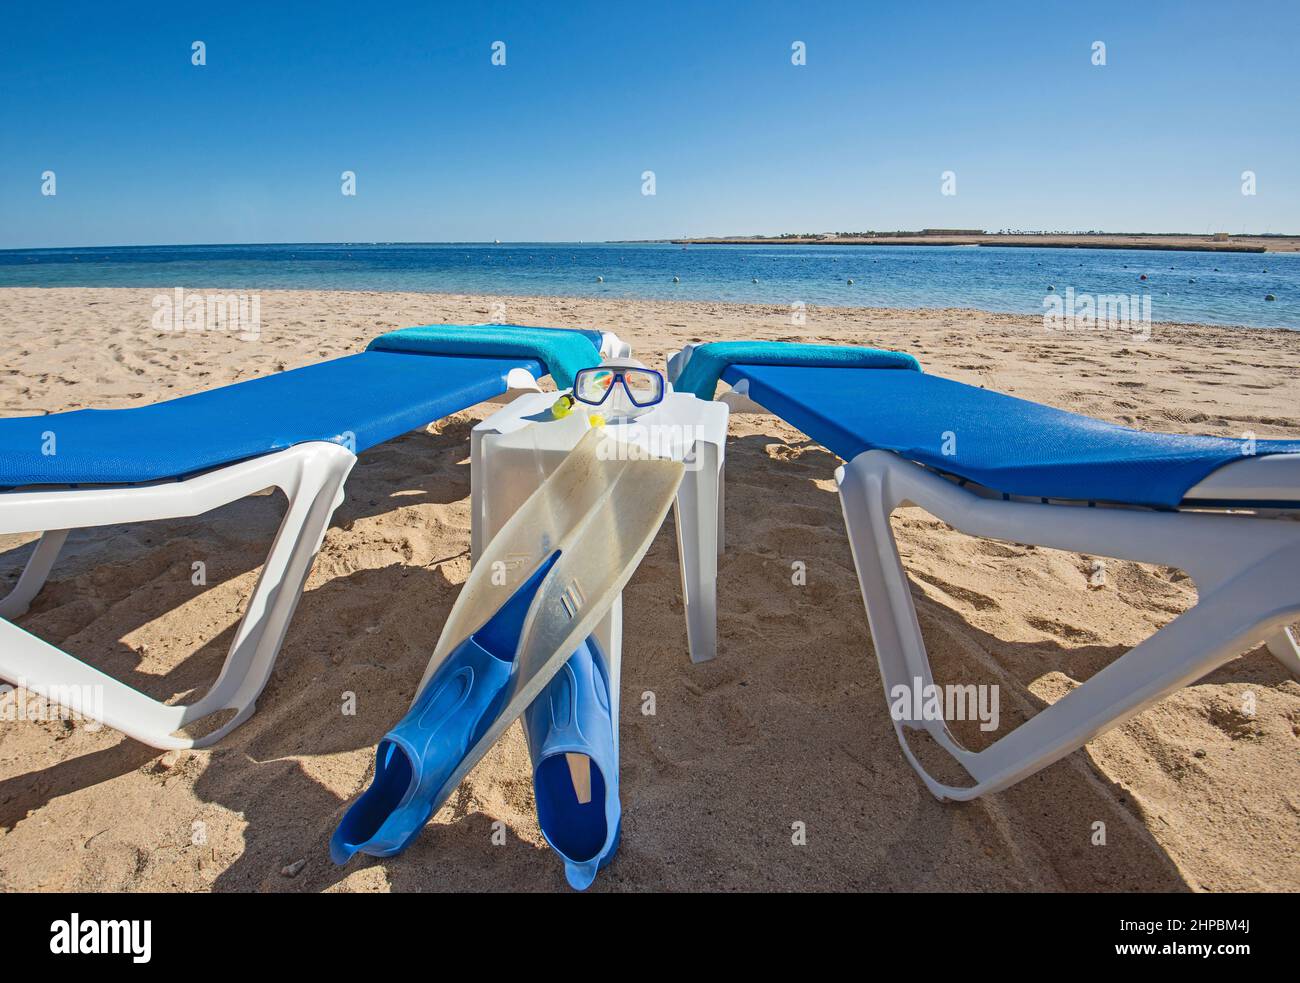 Landscape view over ocean at tropical hotel resort beach with sun loungers and snorkeling equipment Stock Photo